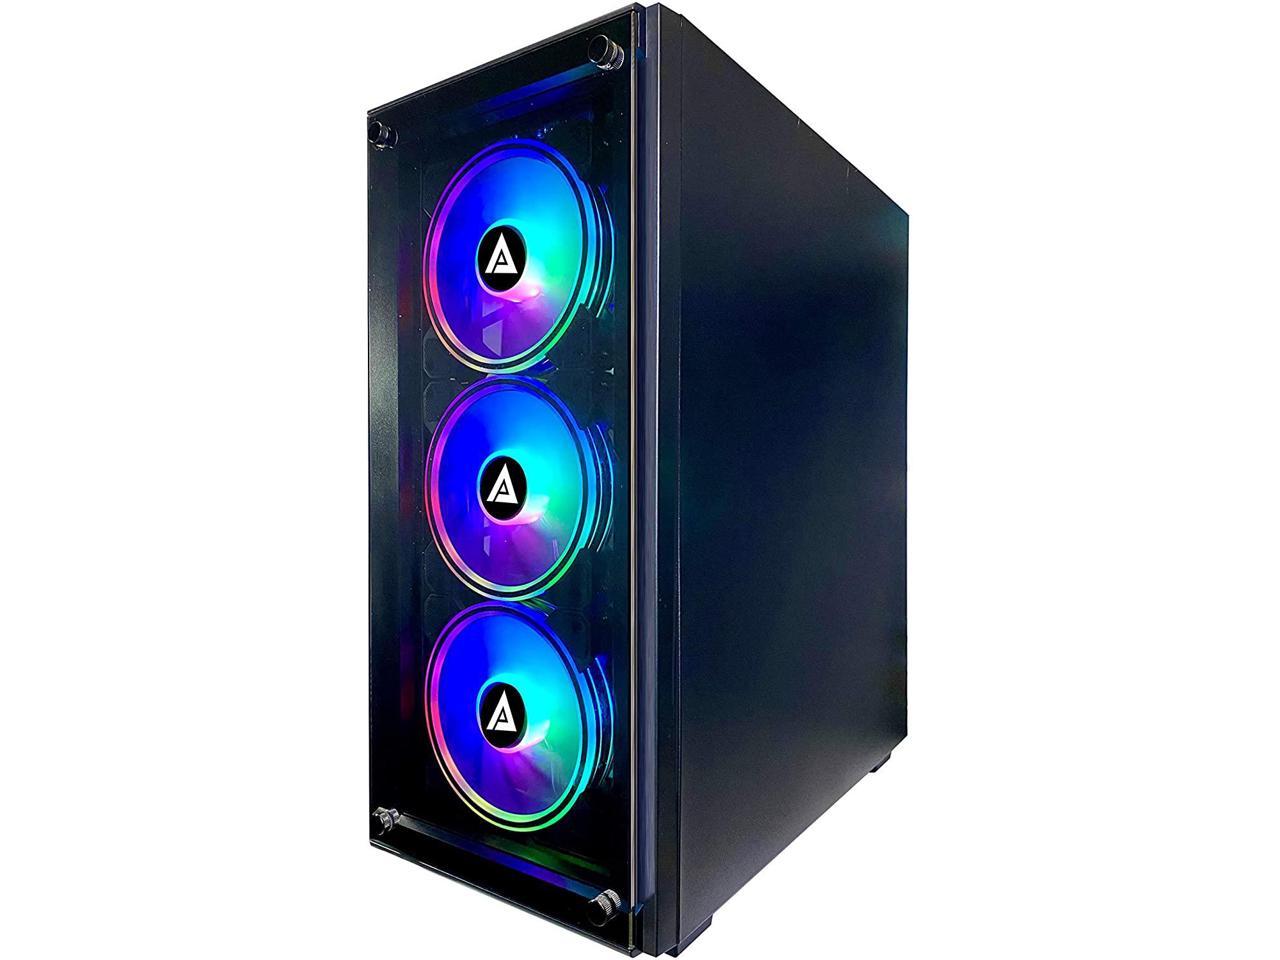 Apevia Genesis-BK Mid Tower Gaming Case with 2 x Tempered Glass Panel, Top  USB3.0/USB2.0/Audio Ports, 4 x RGB Fans, Black Frame